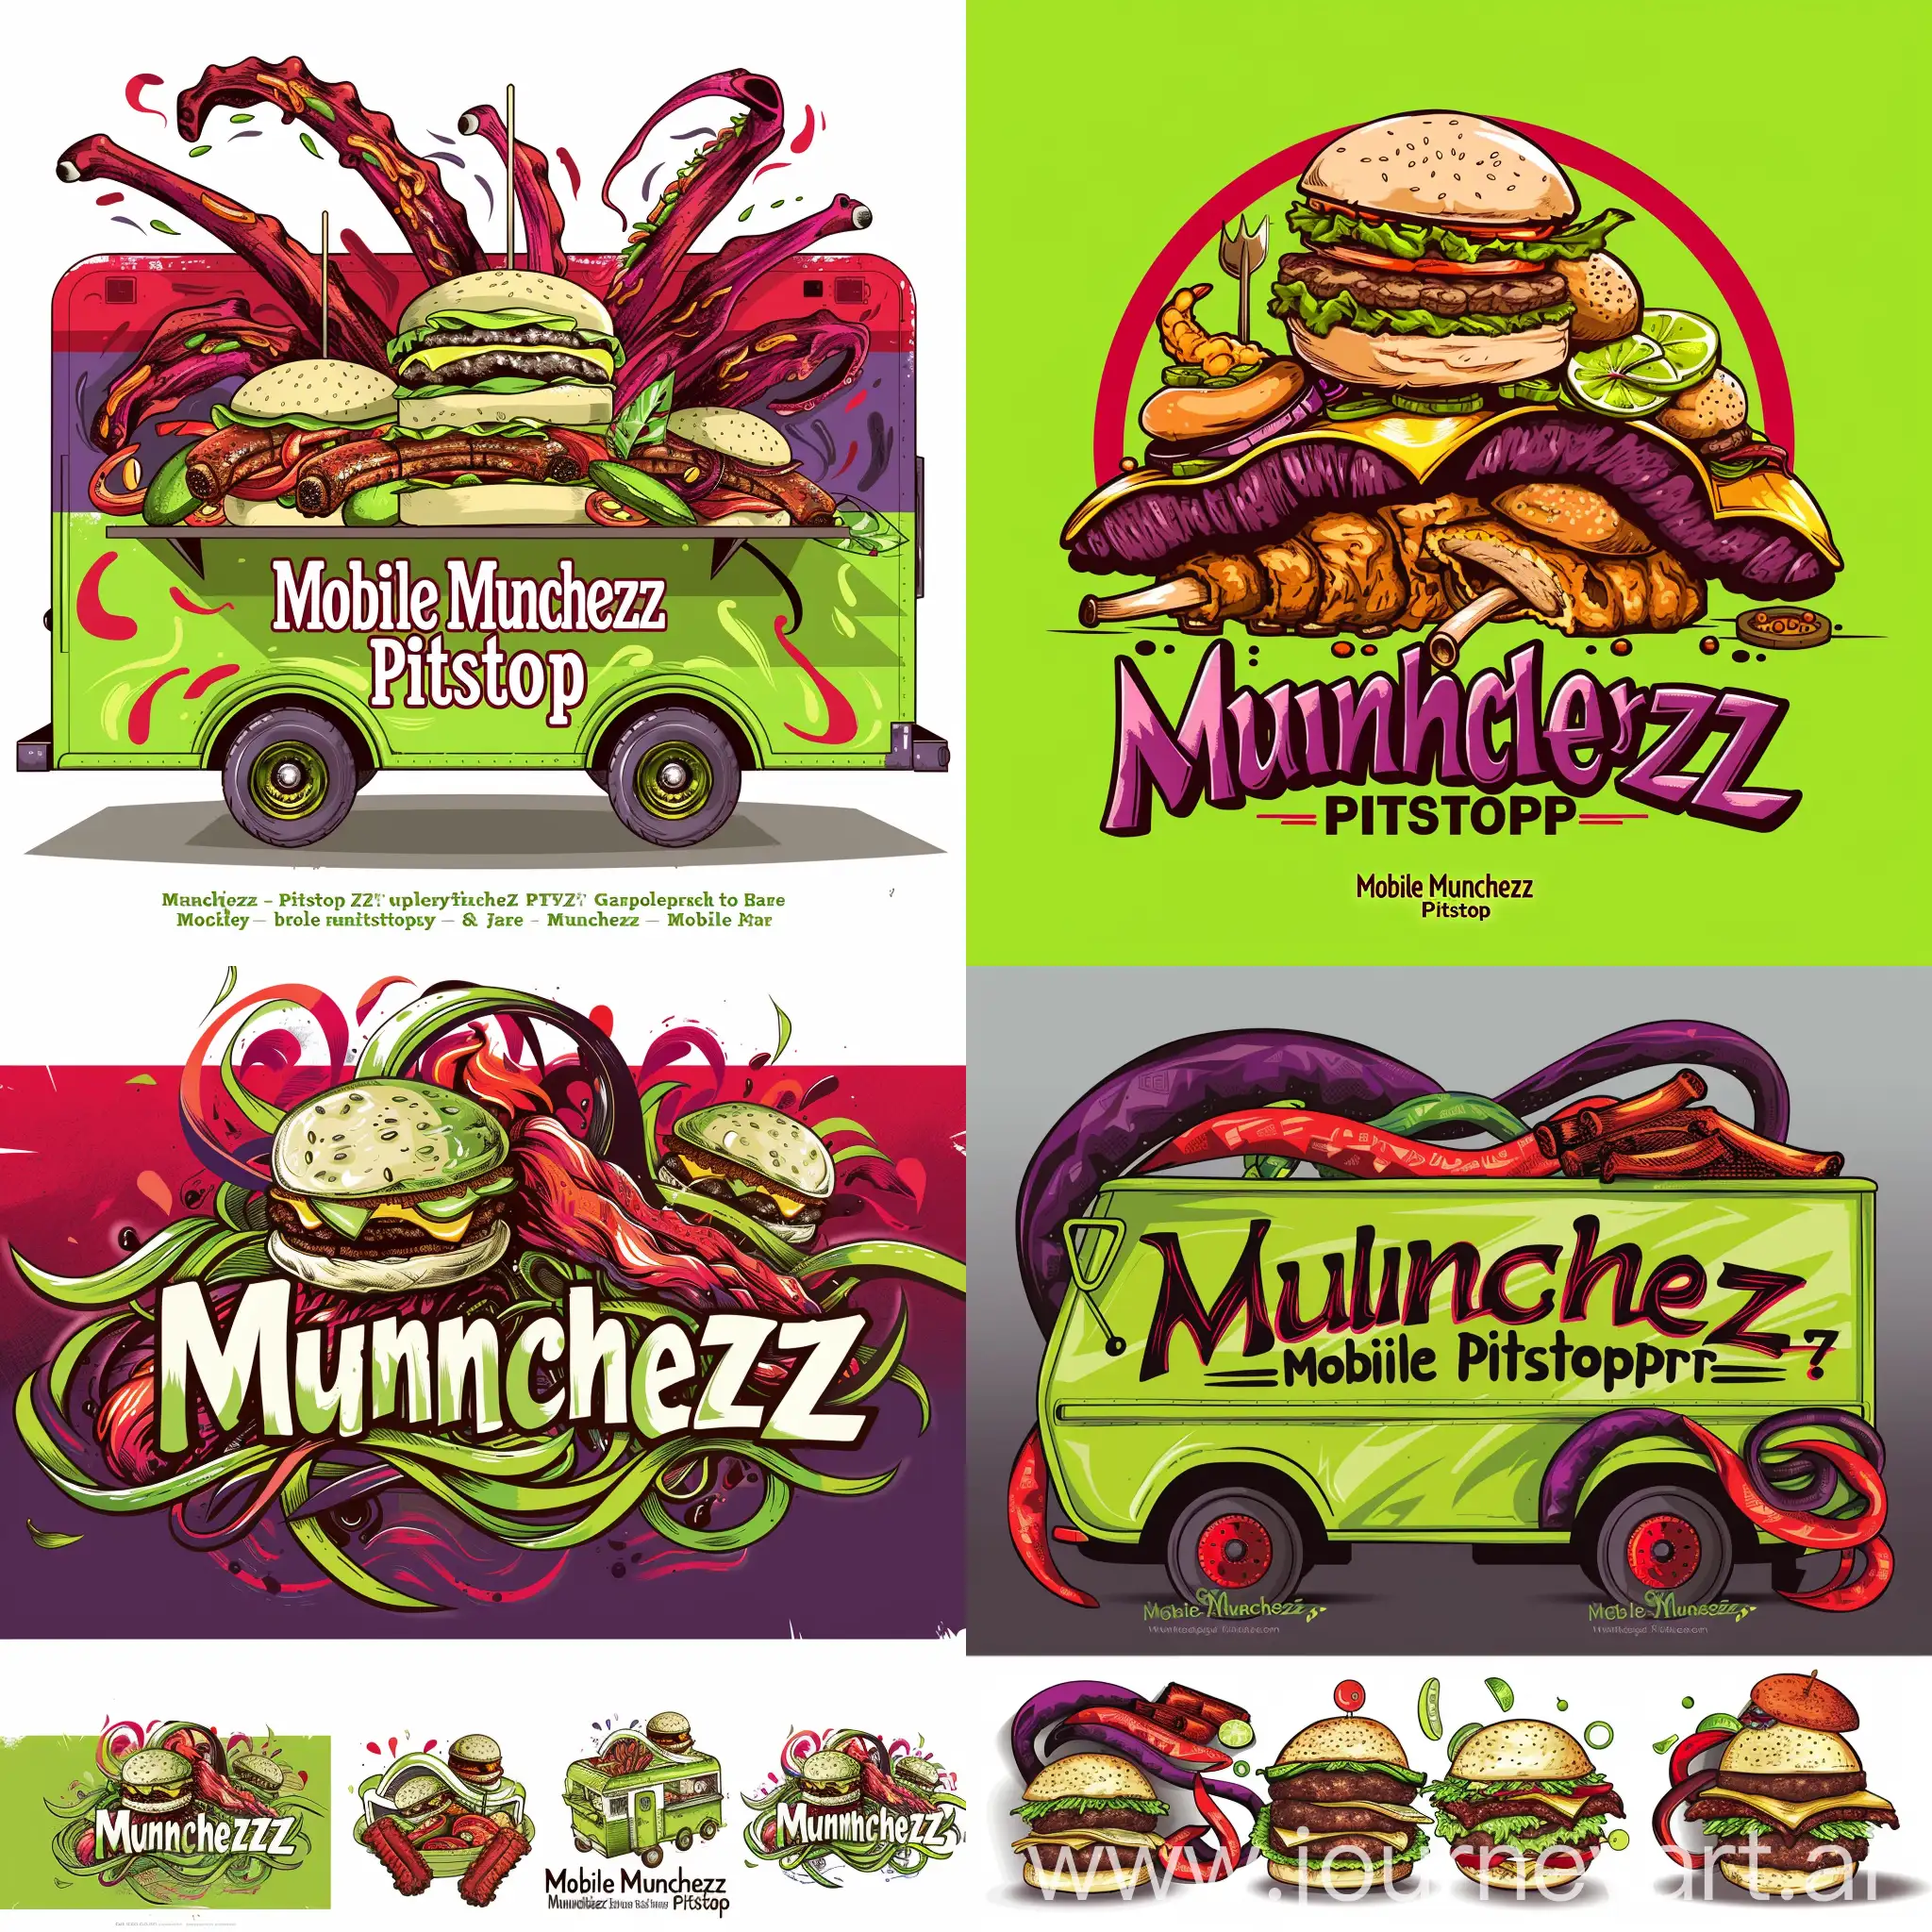 Lively-Fusion-Feast-Sandwiches-Burgers-and-More-at-Mobile-Munchezz-Pitstop